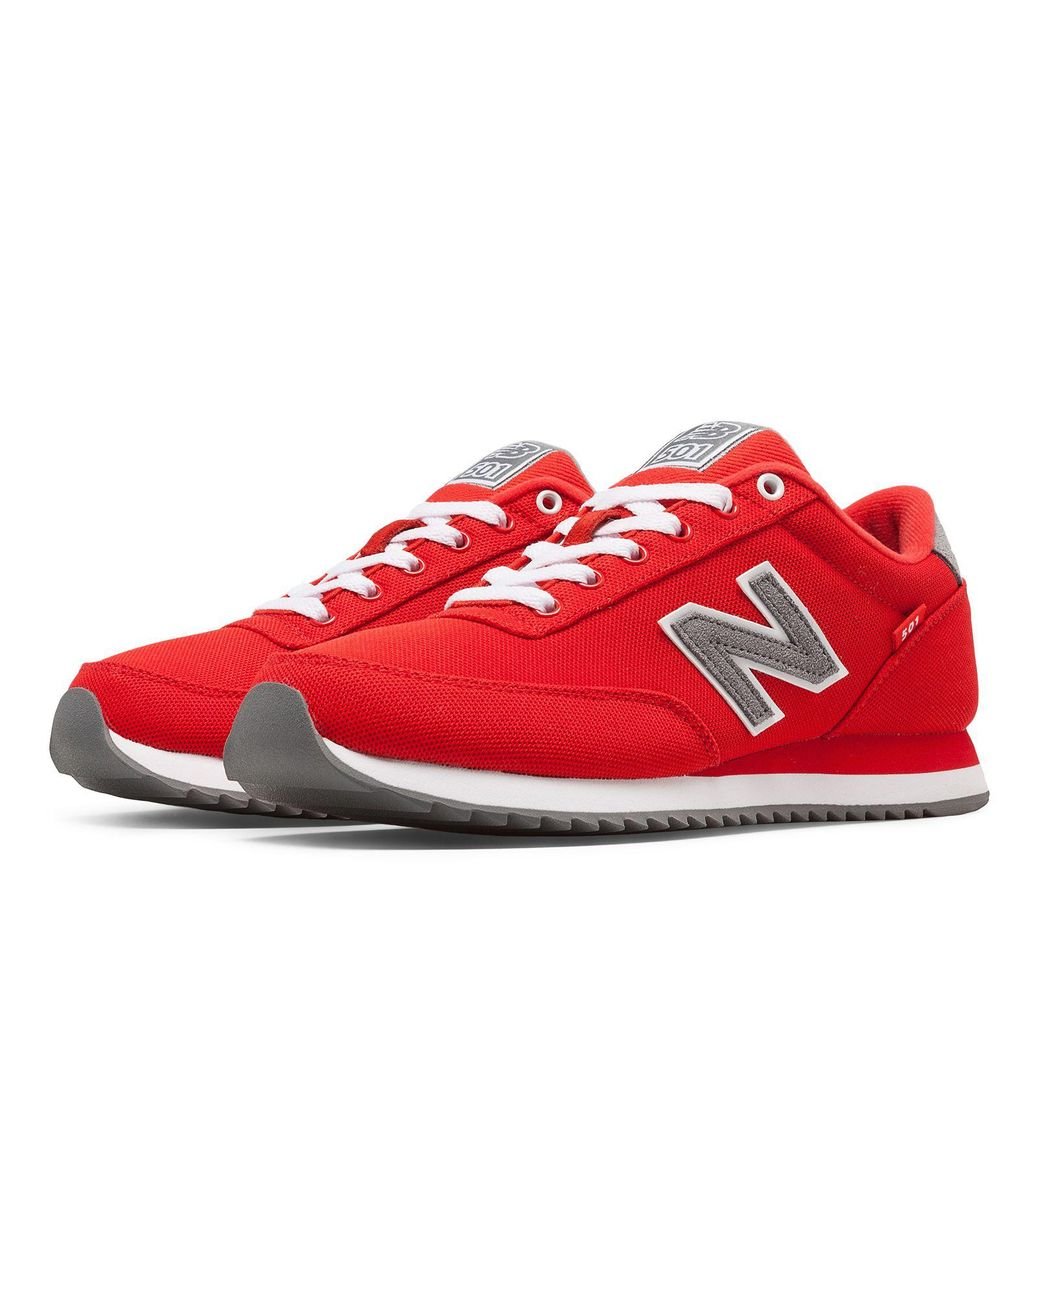 New Balance 501 Ripple Sole In Red | Lyst